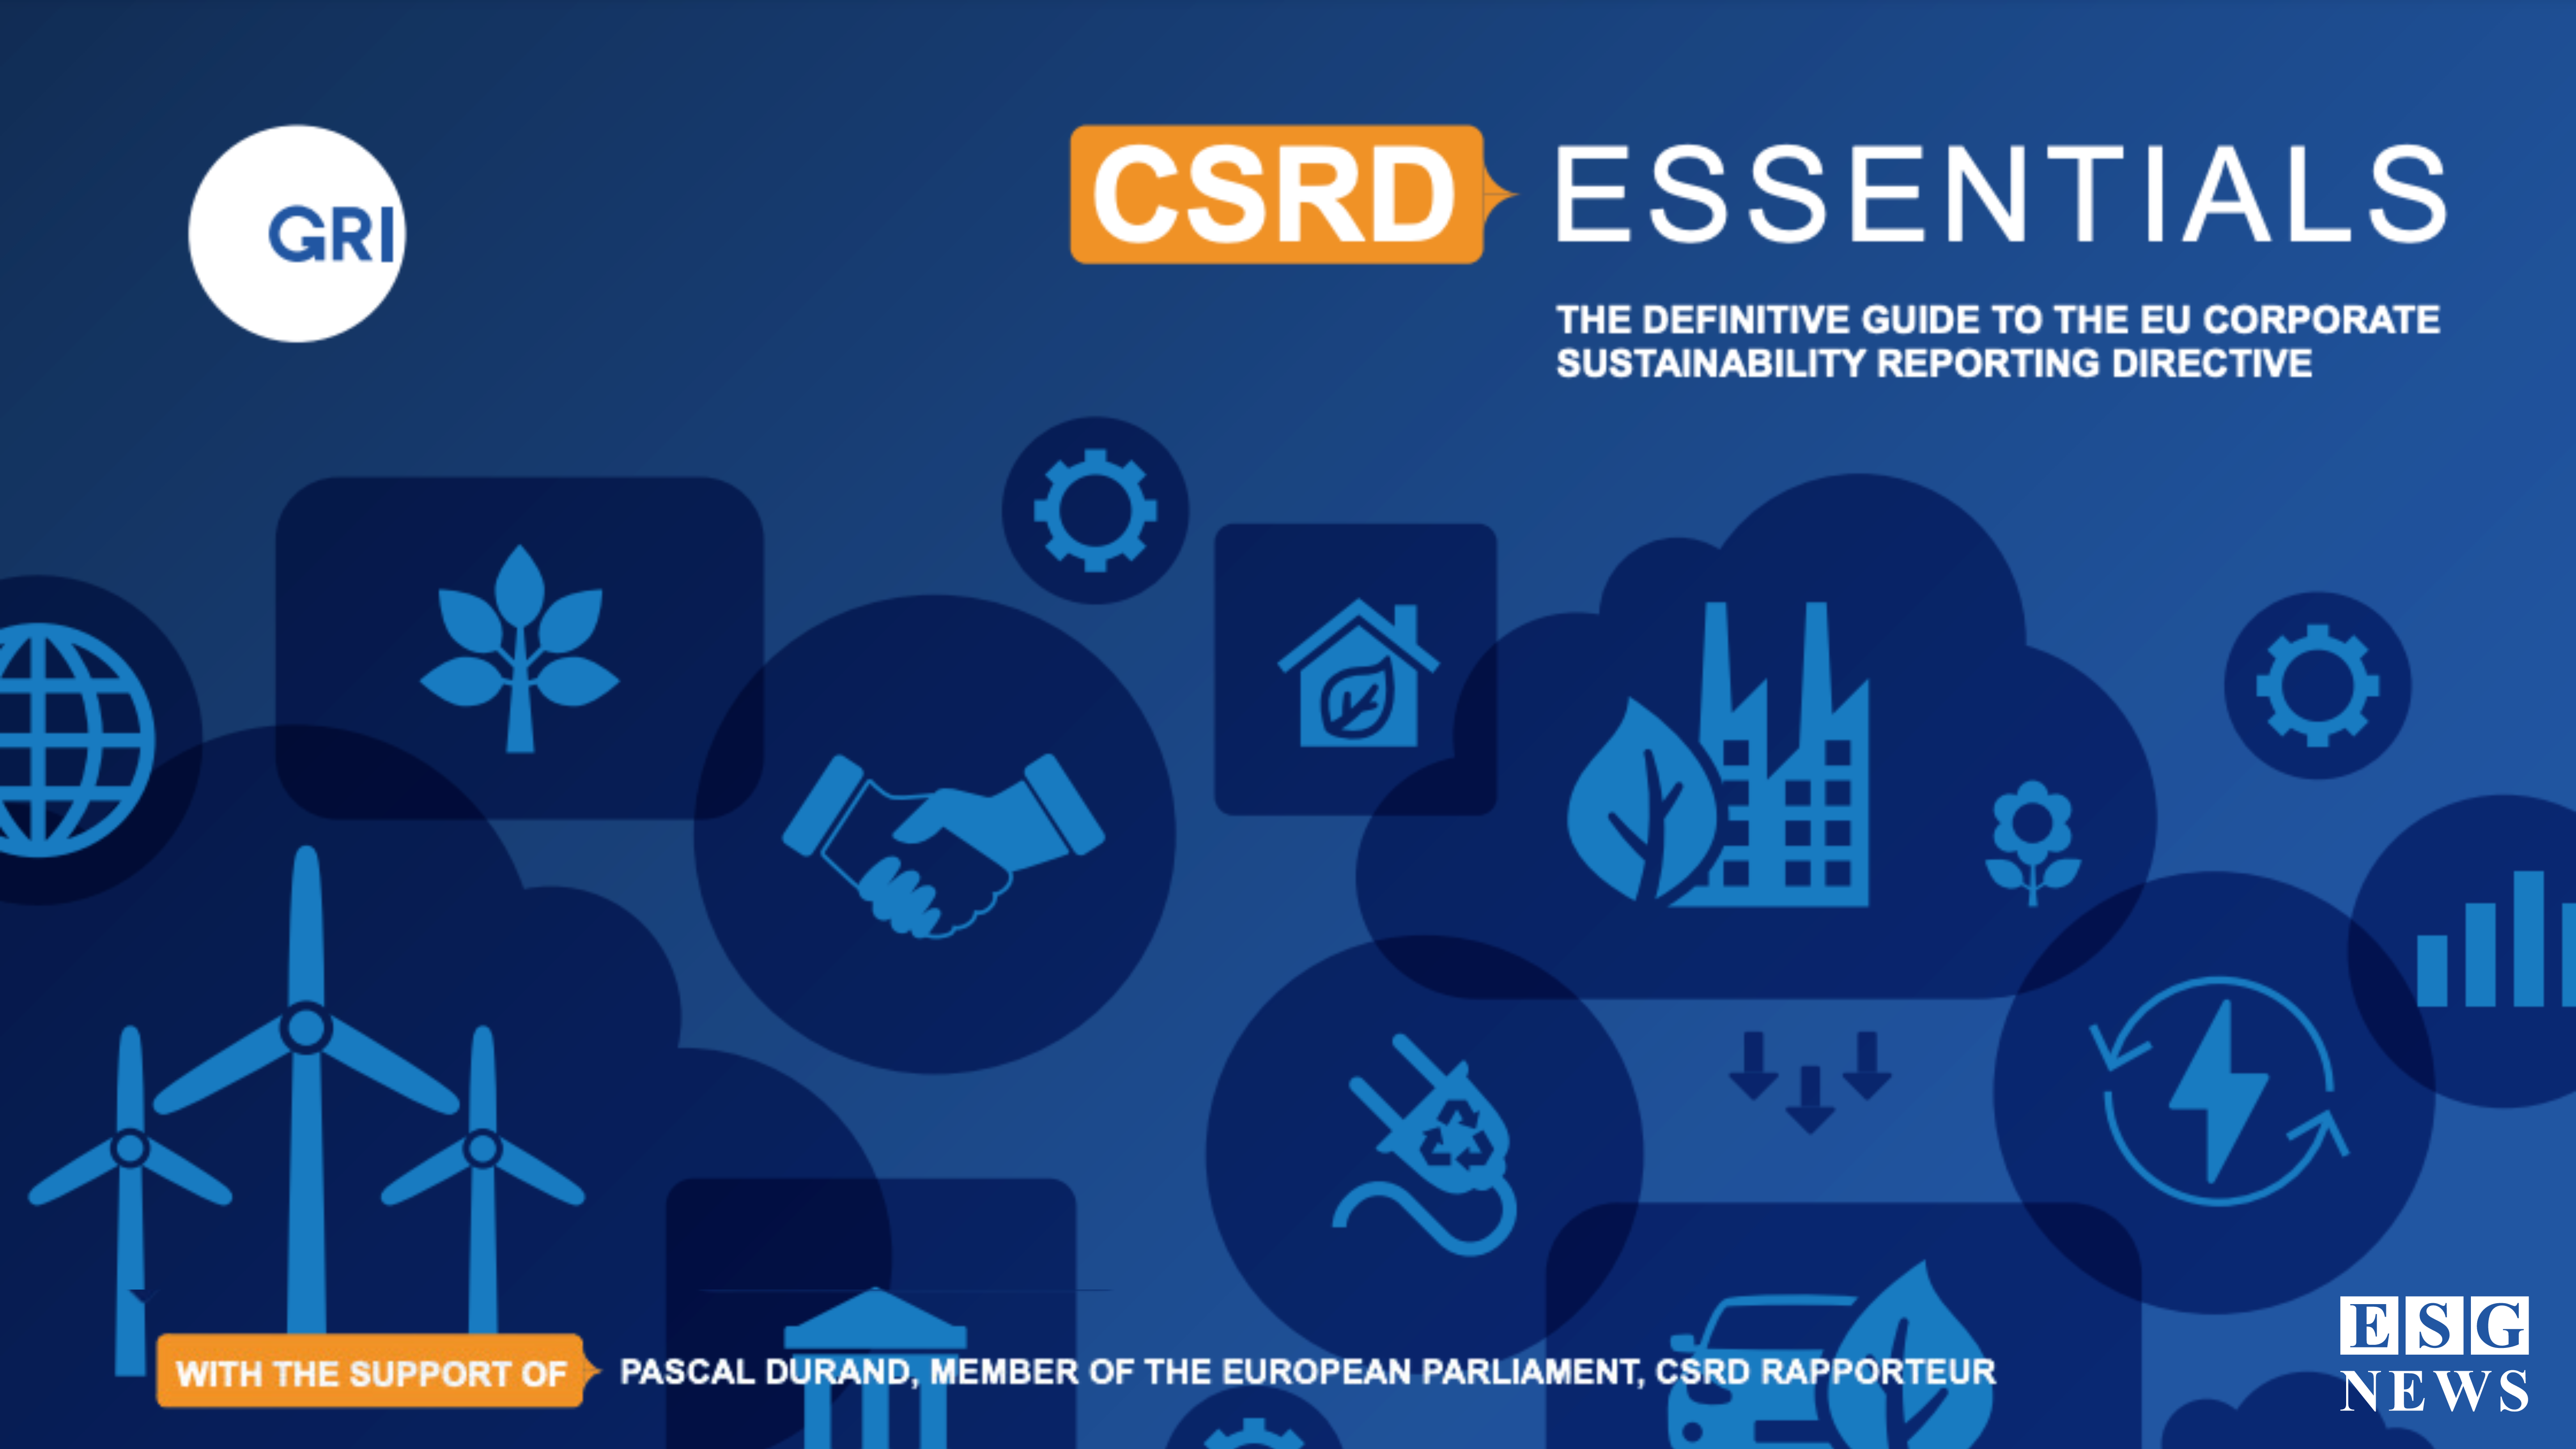 GRI Launches ‘CSRD Essentials’ Series to Simplify EU's Corporate Sustainability Reporting Directive